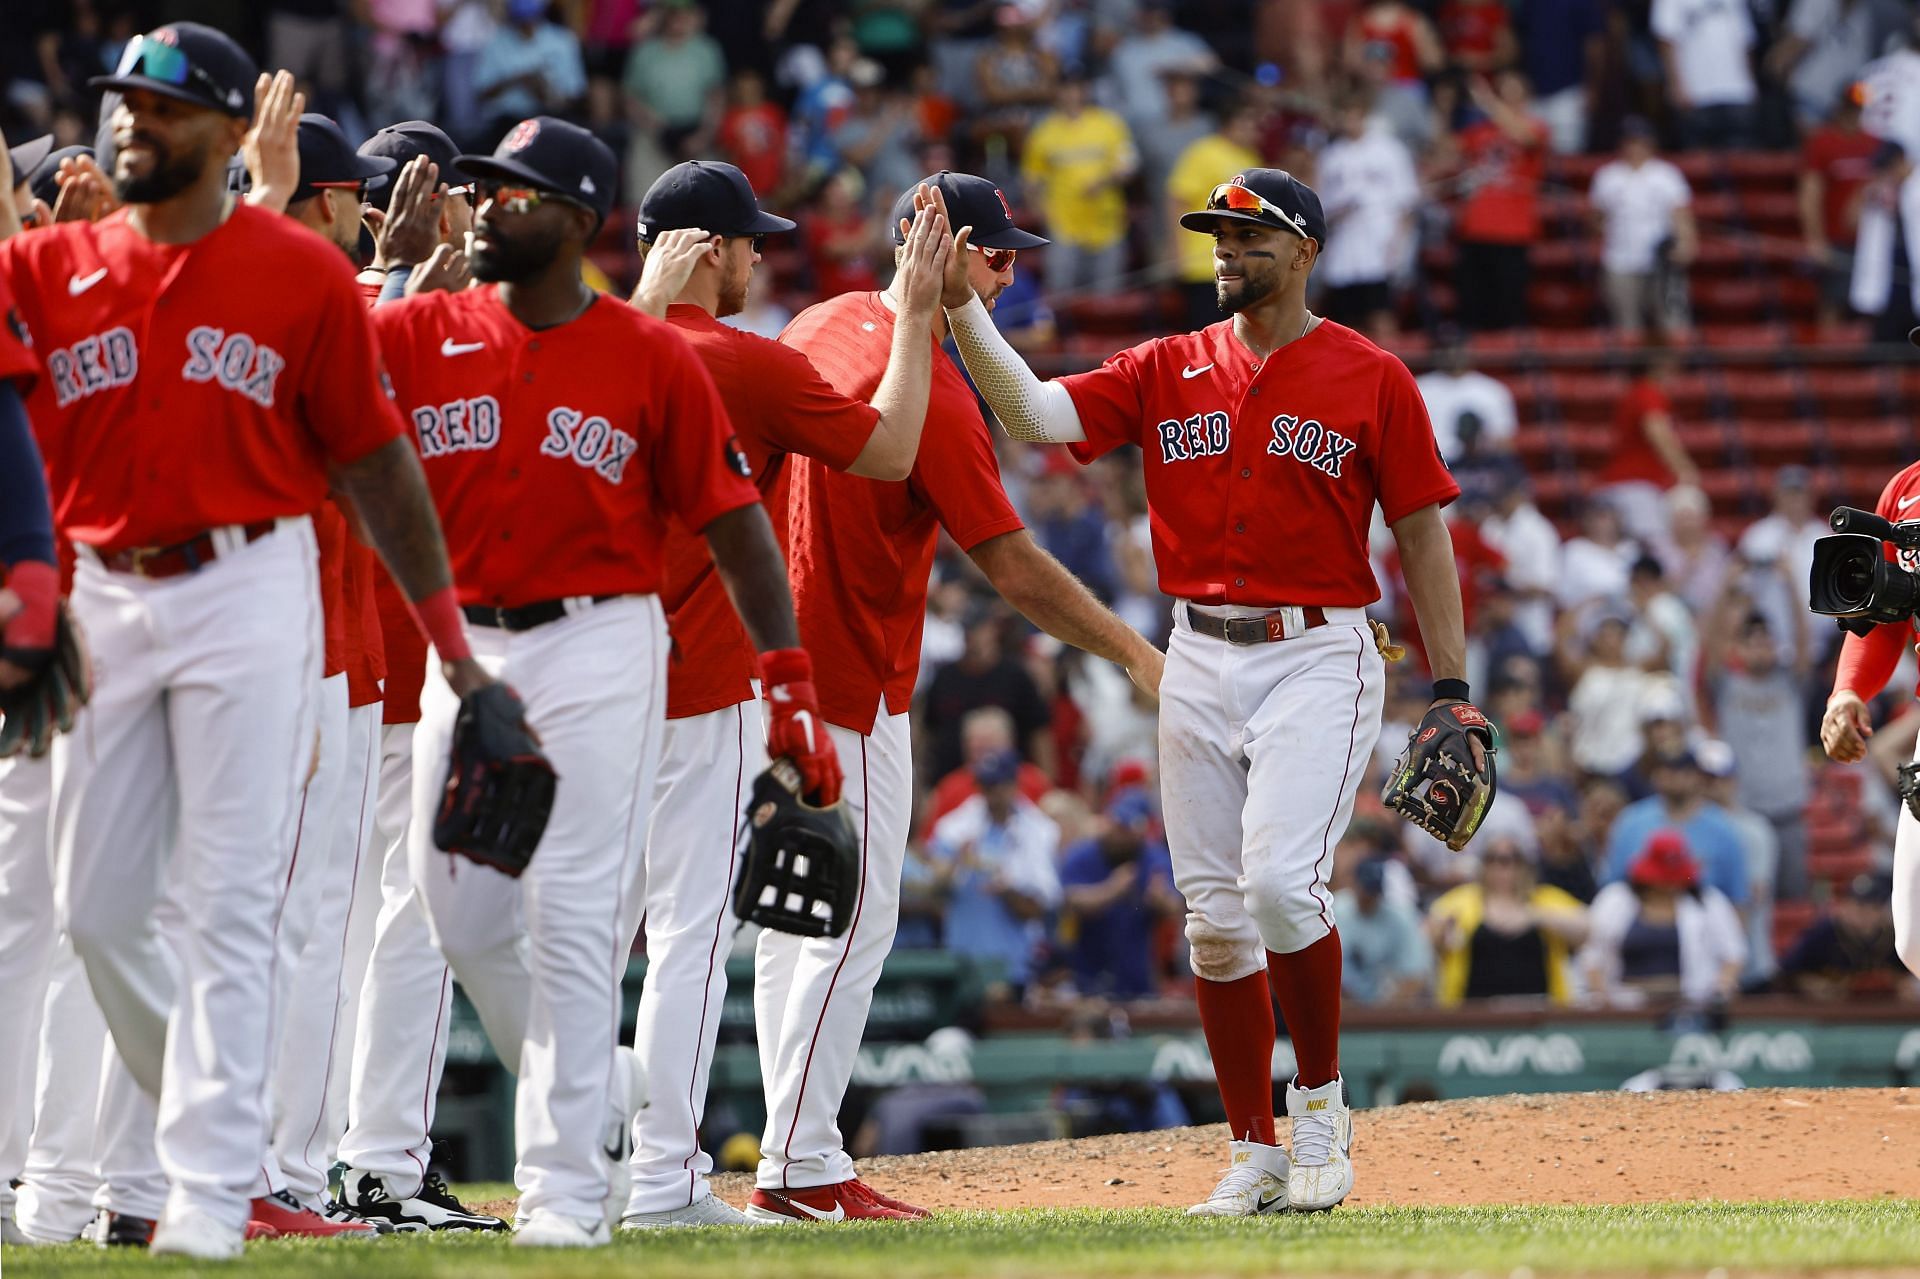 Red Sox celebrating a win over the Brewers